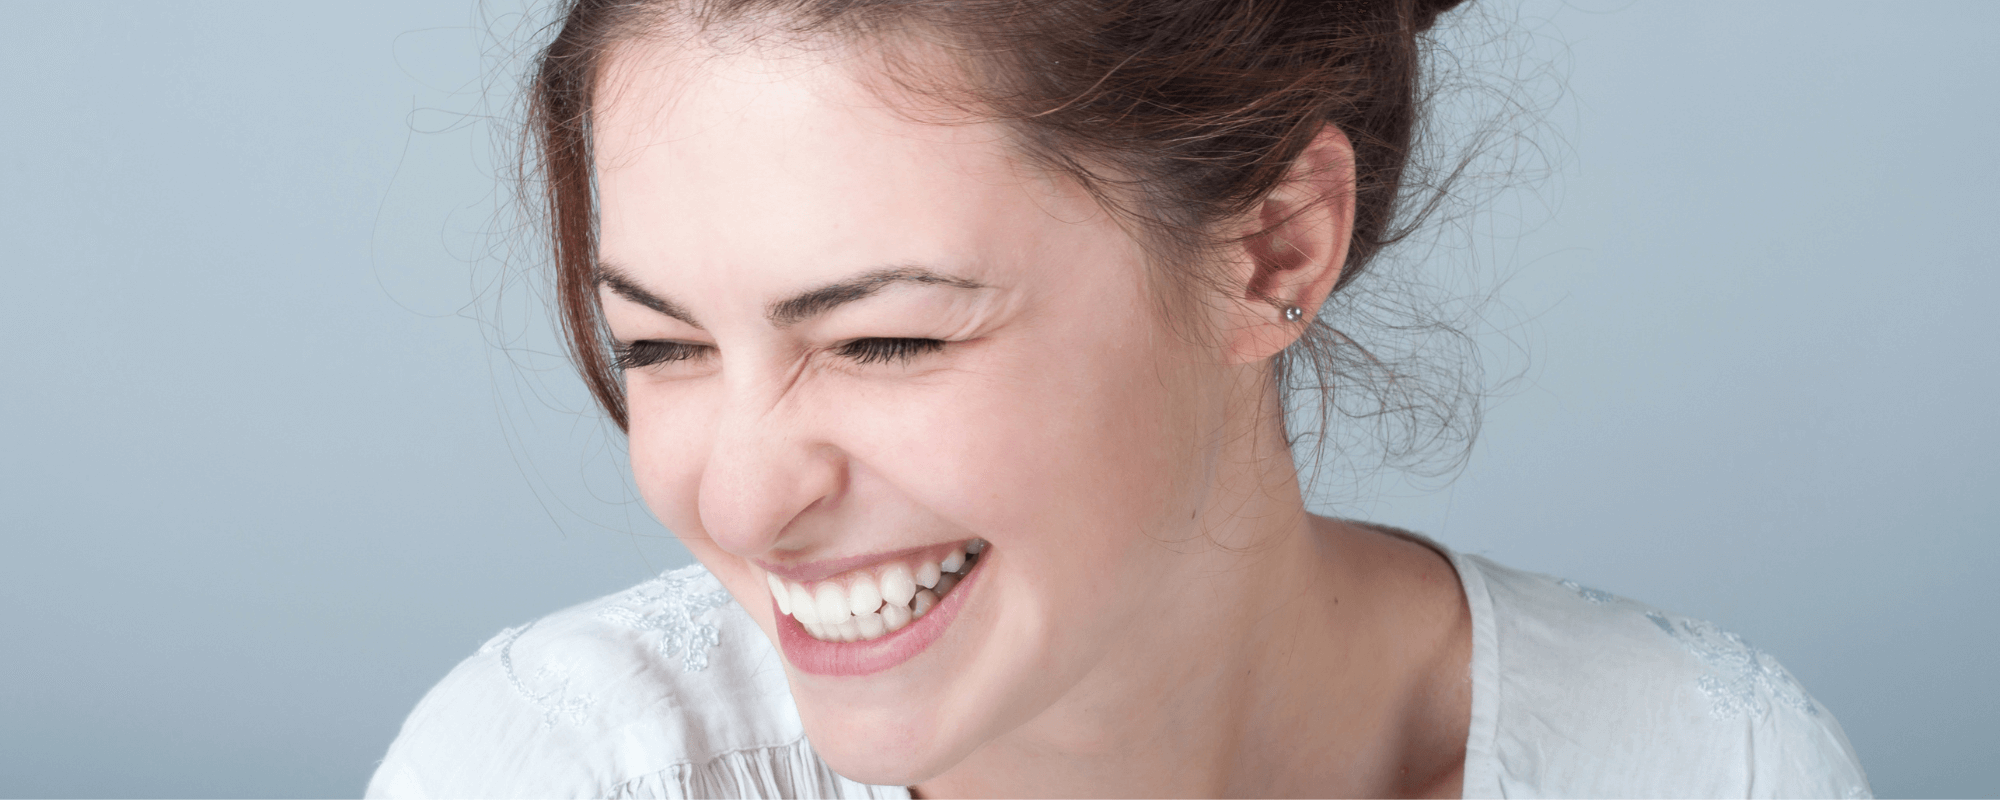 woman smiling with white teeth after using teeth whitening strips.